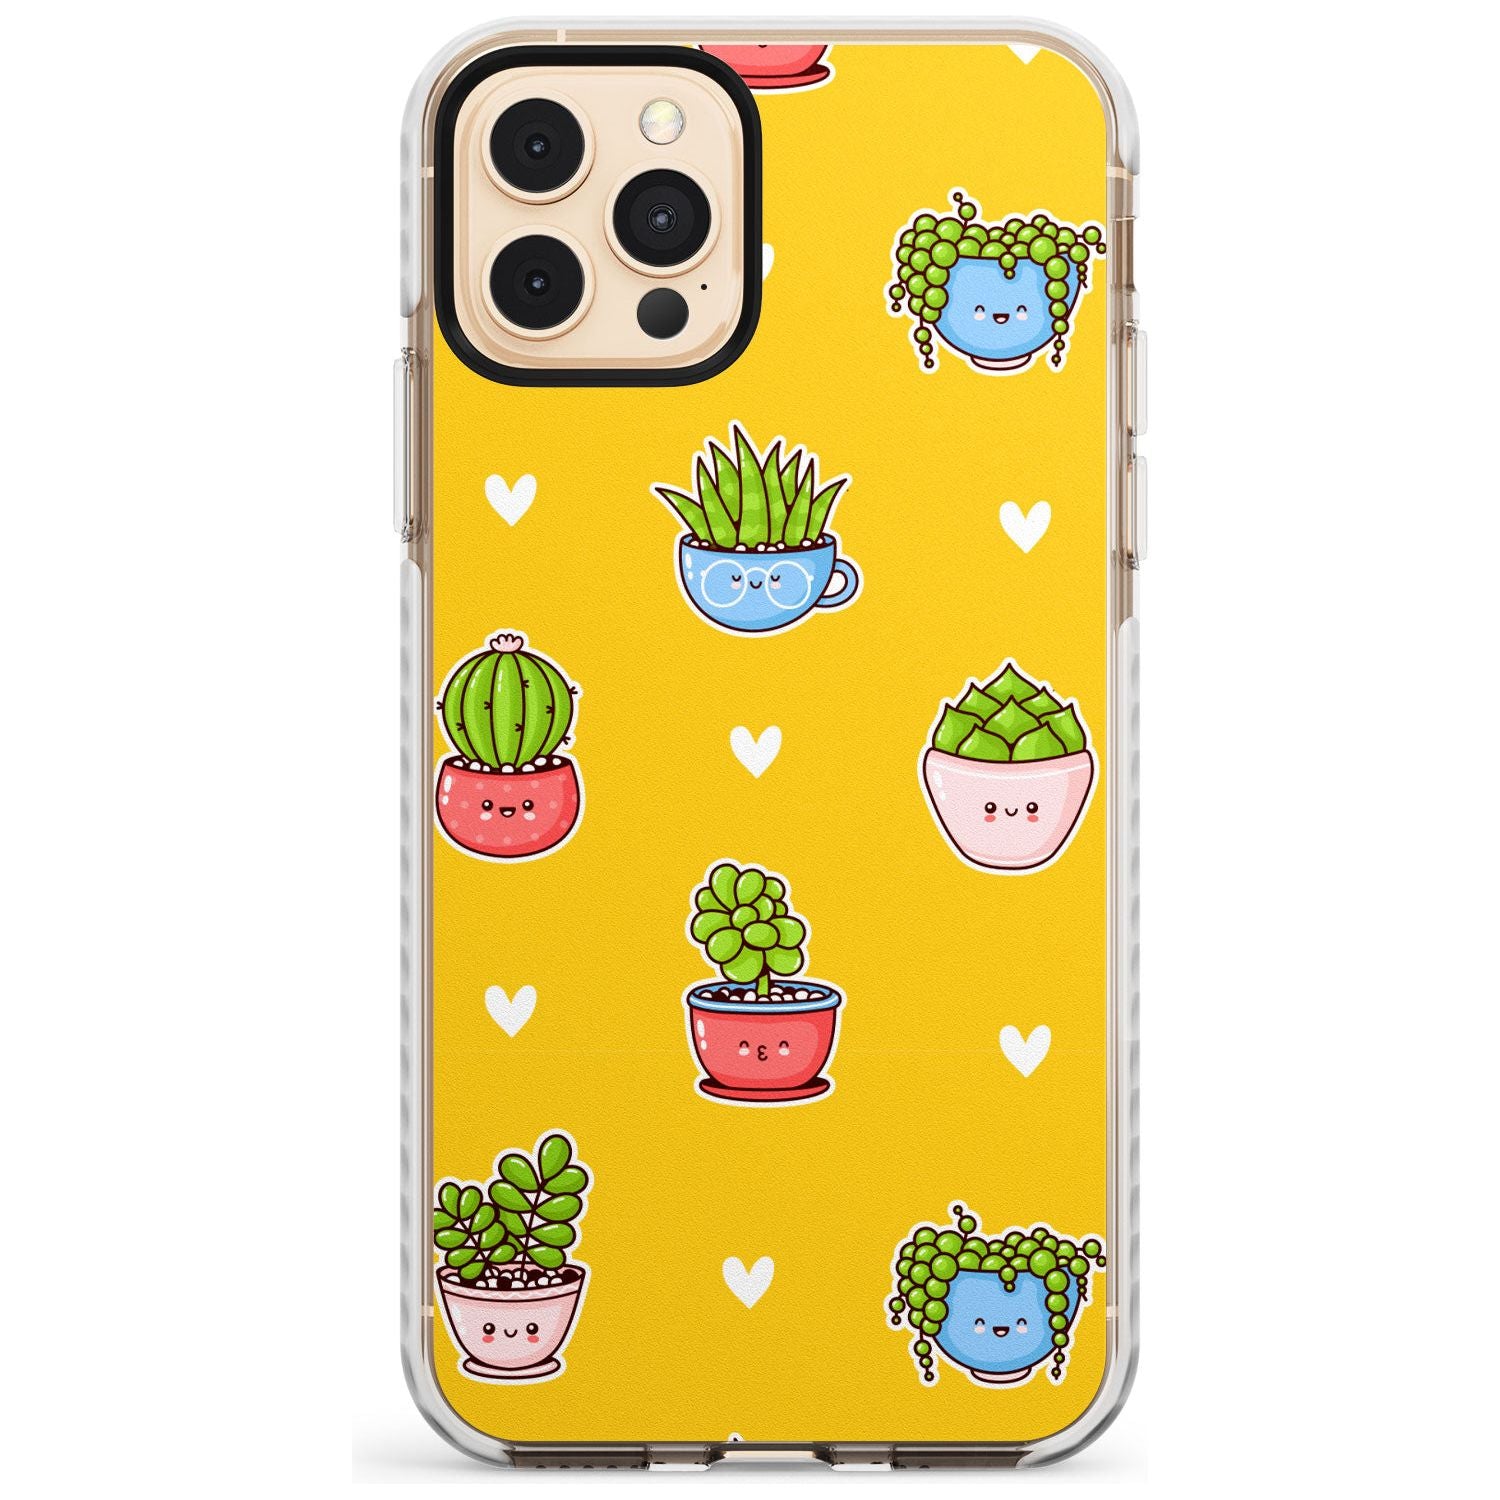 Plant Faces Kawaii Pattern Impact Phone Case for iPhone 11 Pro Max